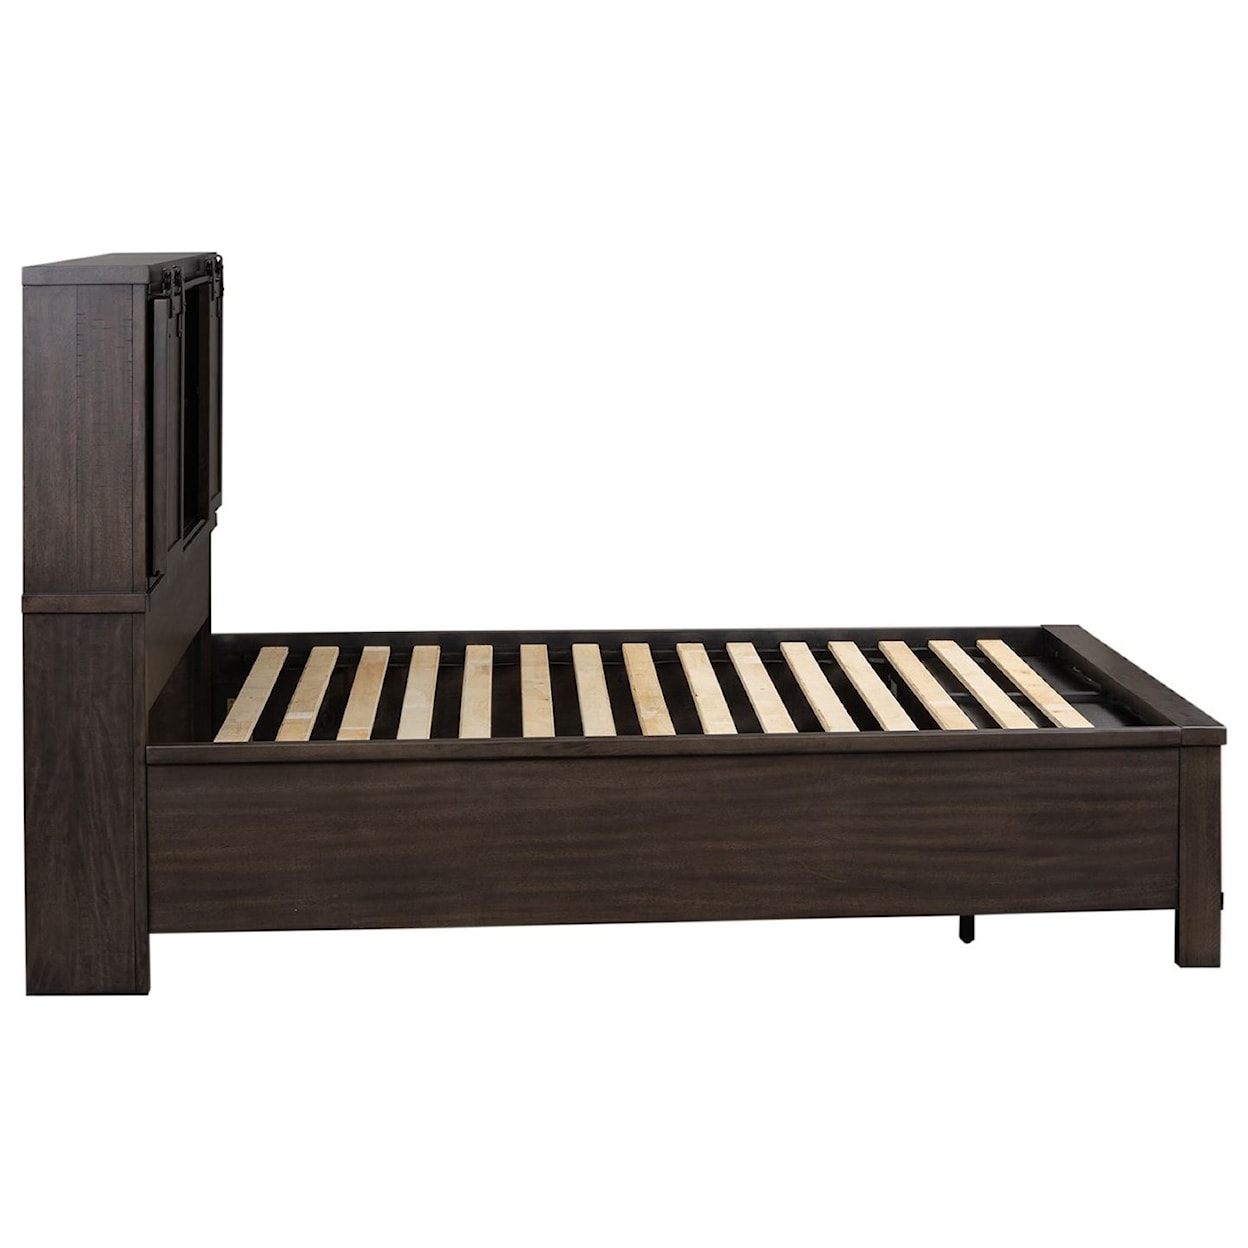 Liberty Furniture Thornwood Hills Queen Bookcase Bed